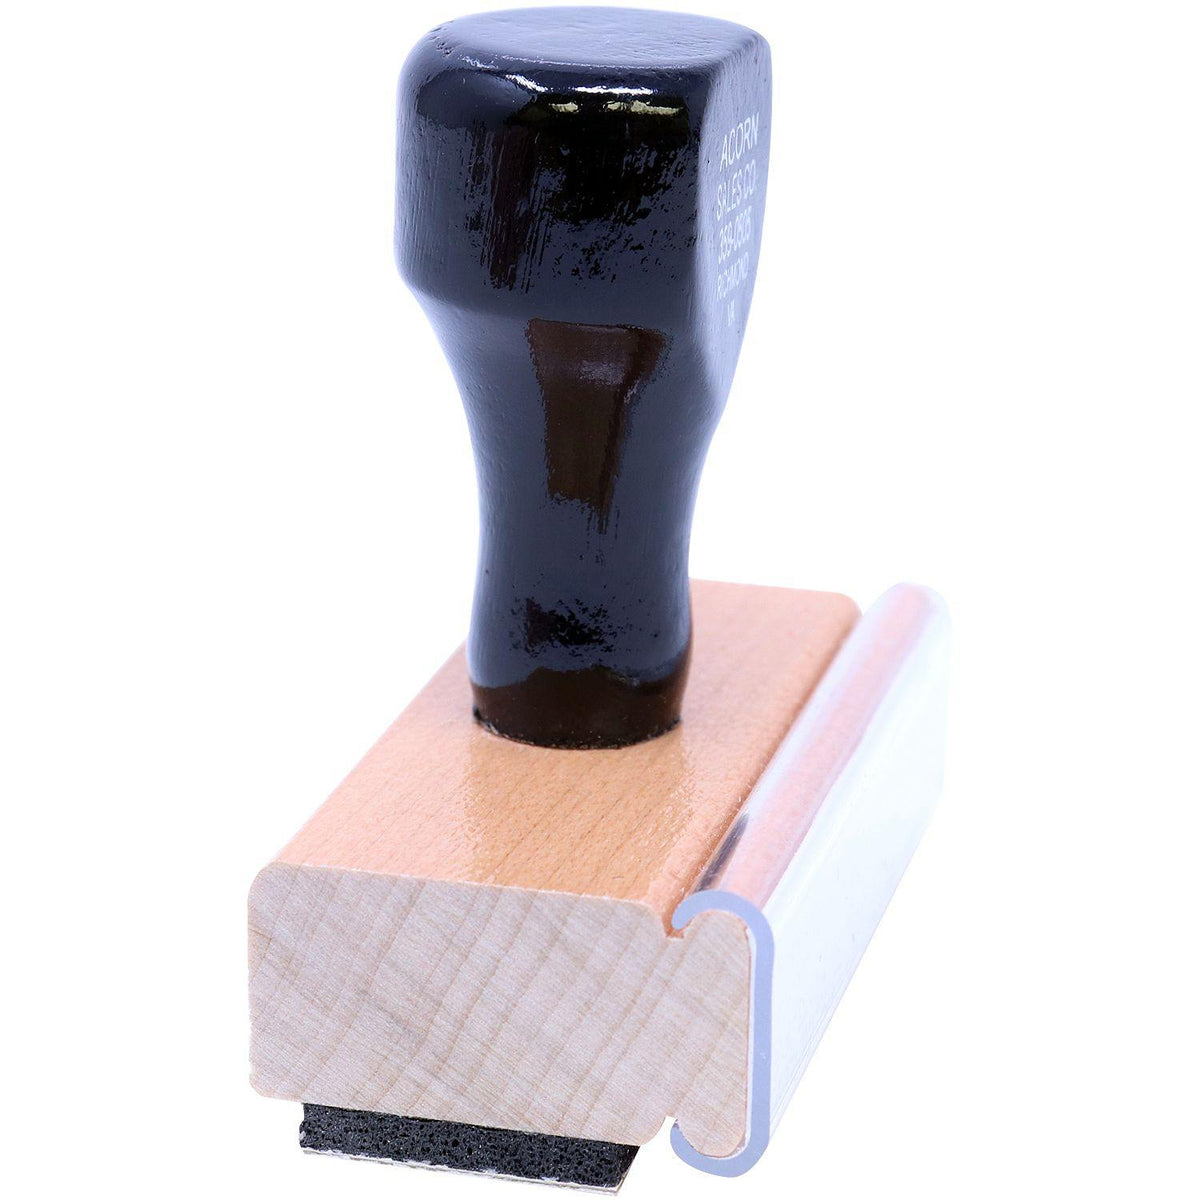 Side View of Fax Stamp Rubber Stamp at an Angle